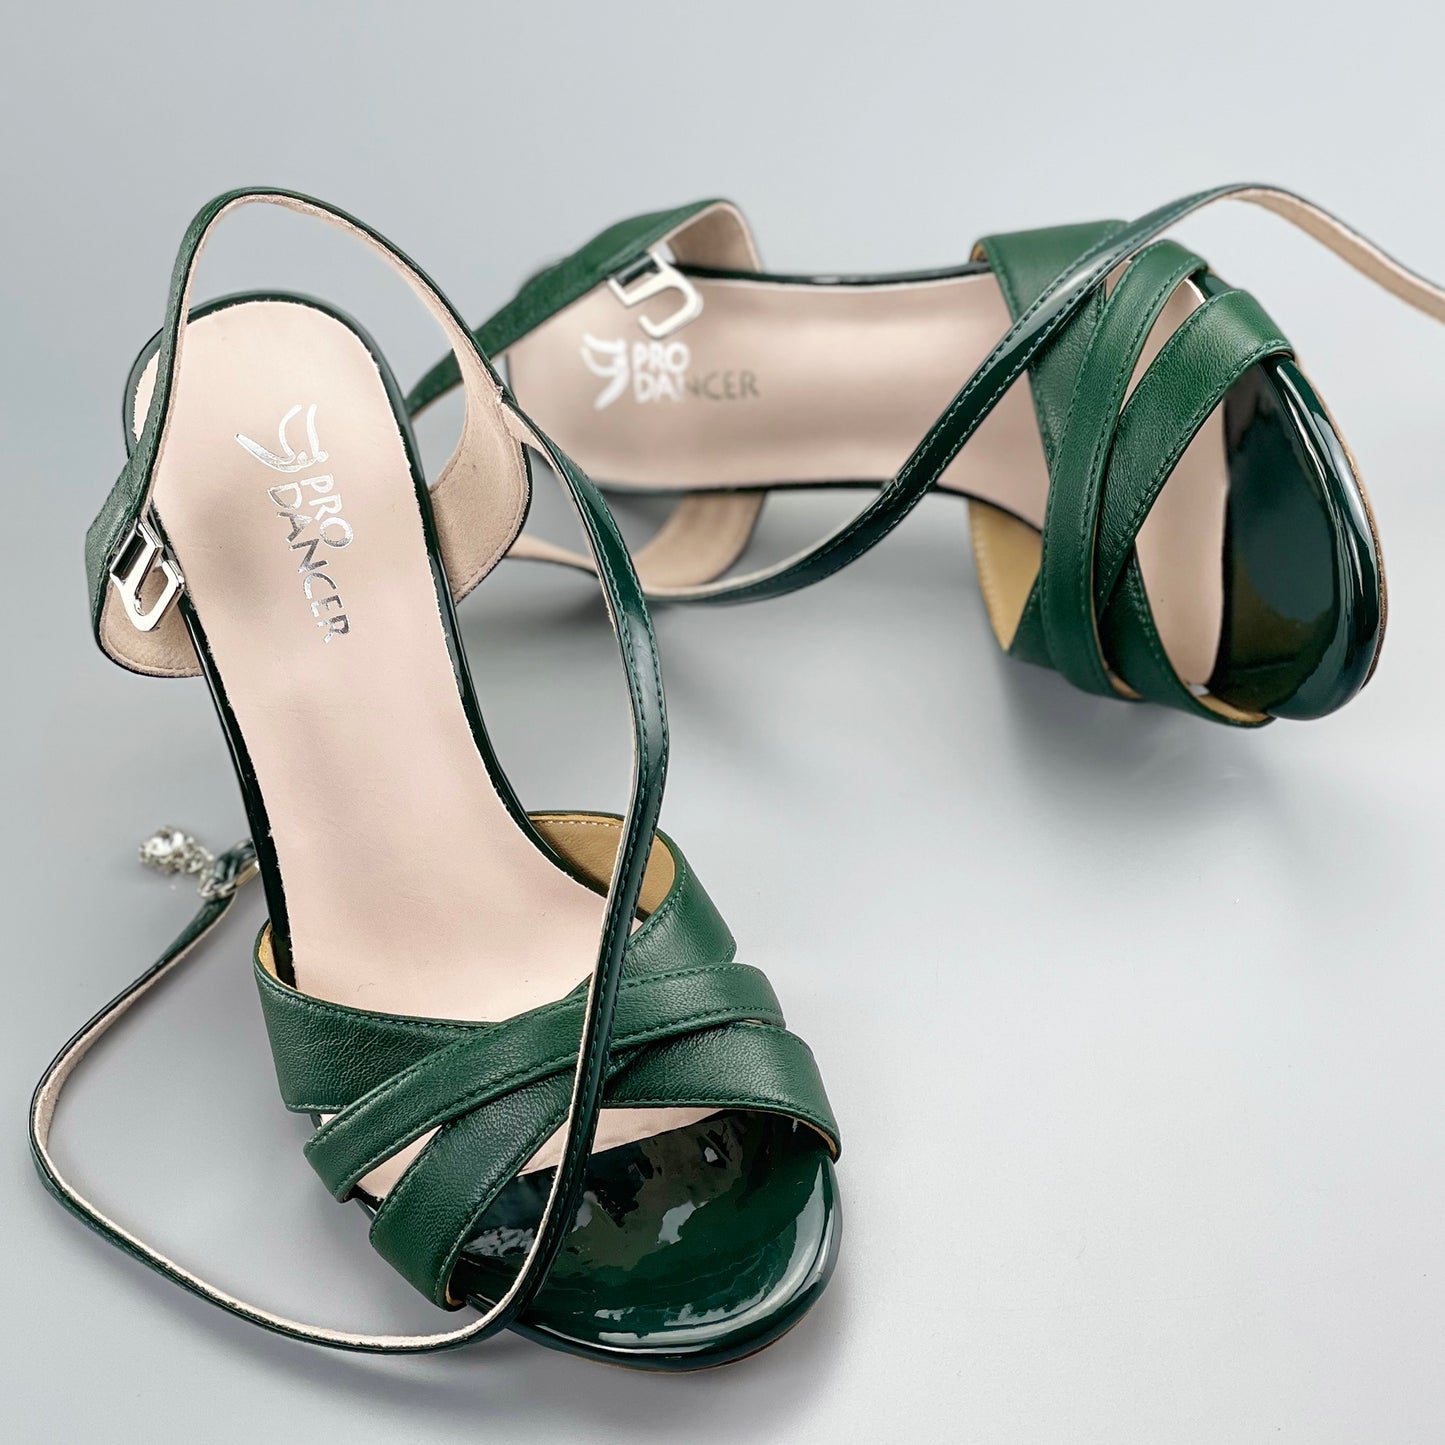 Pro Dancer Peep-toe Argentine Tango Shoes Closed-back High Heels Hard Leather Sole Green